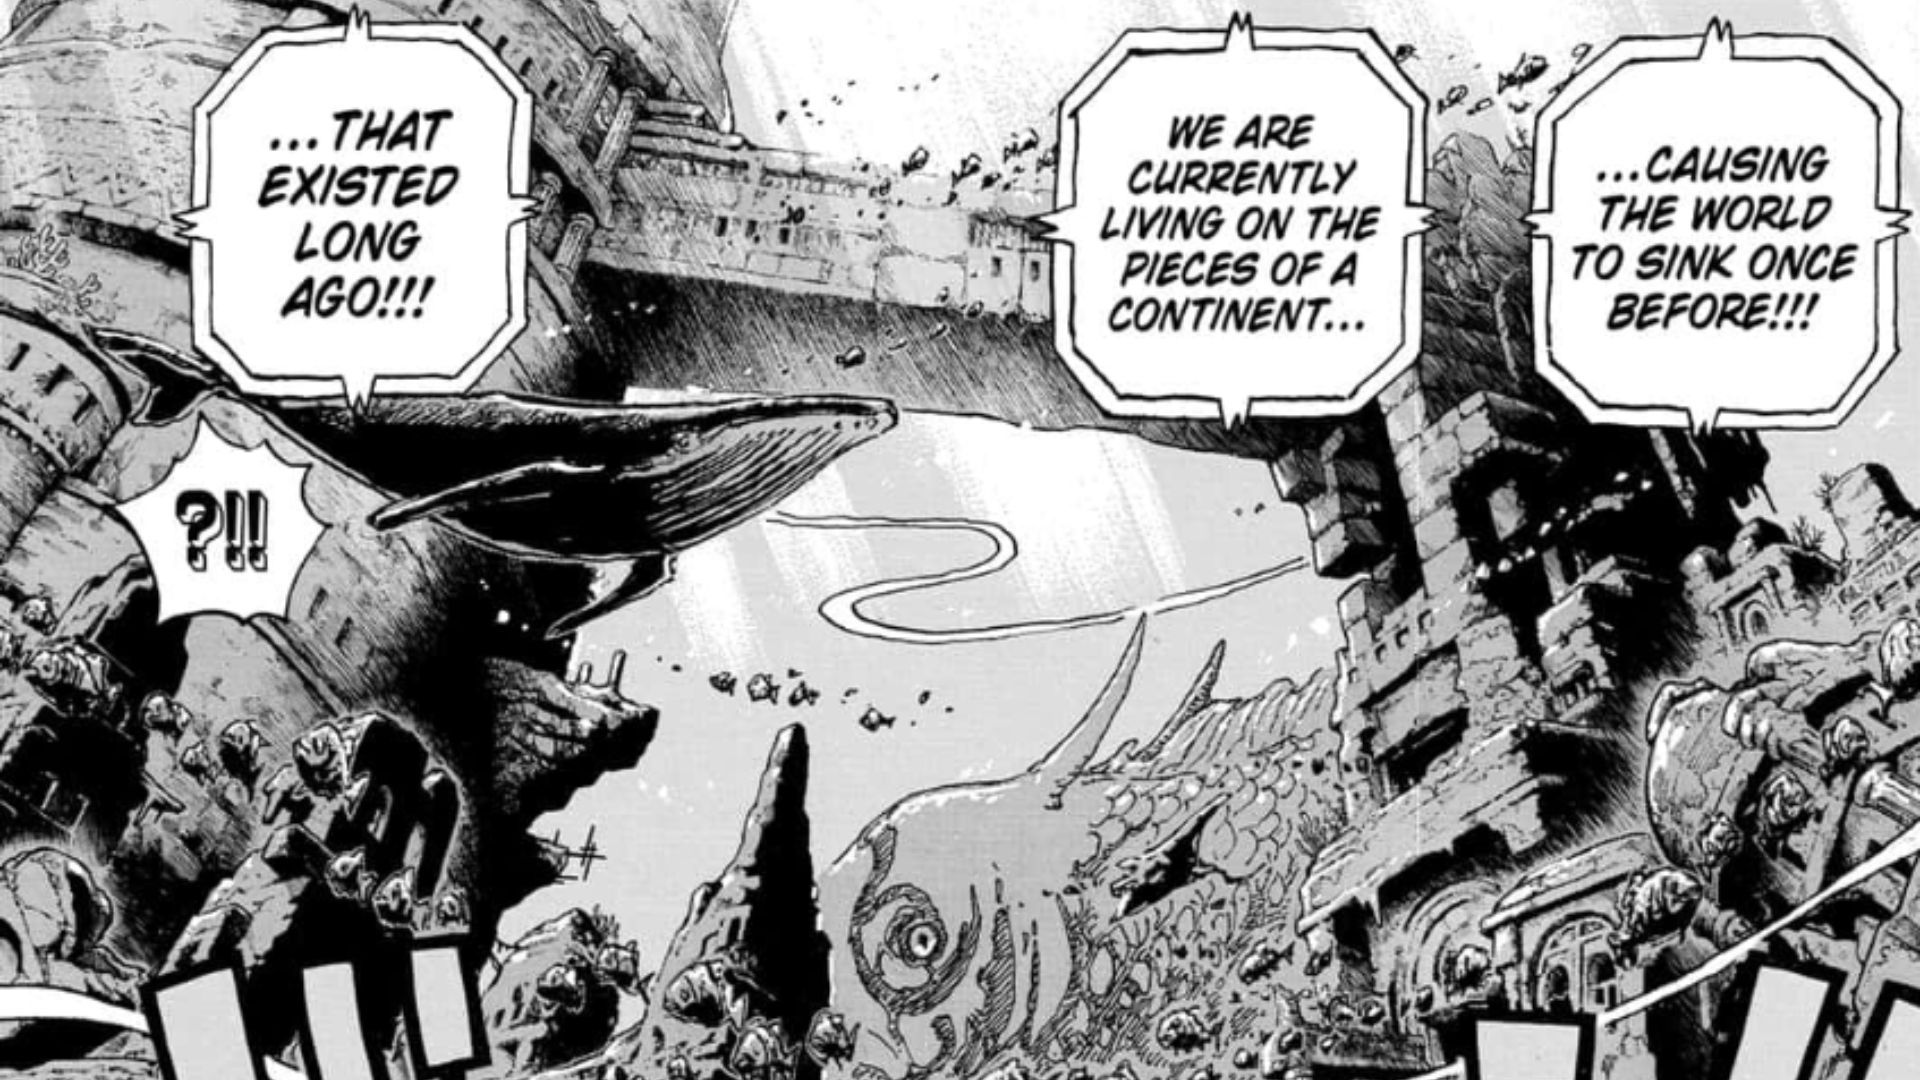 A panel from One Piece Chapter #1115 revealing the sunken Ancient Kingdom